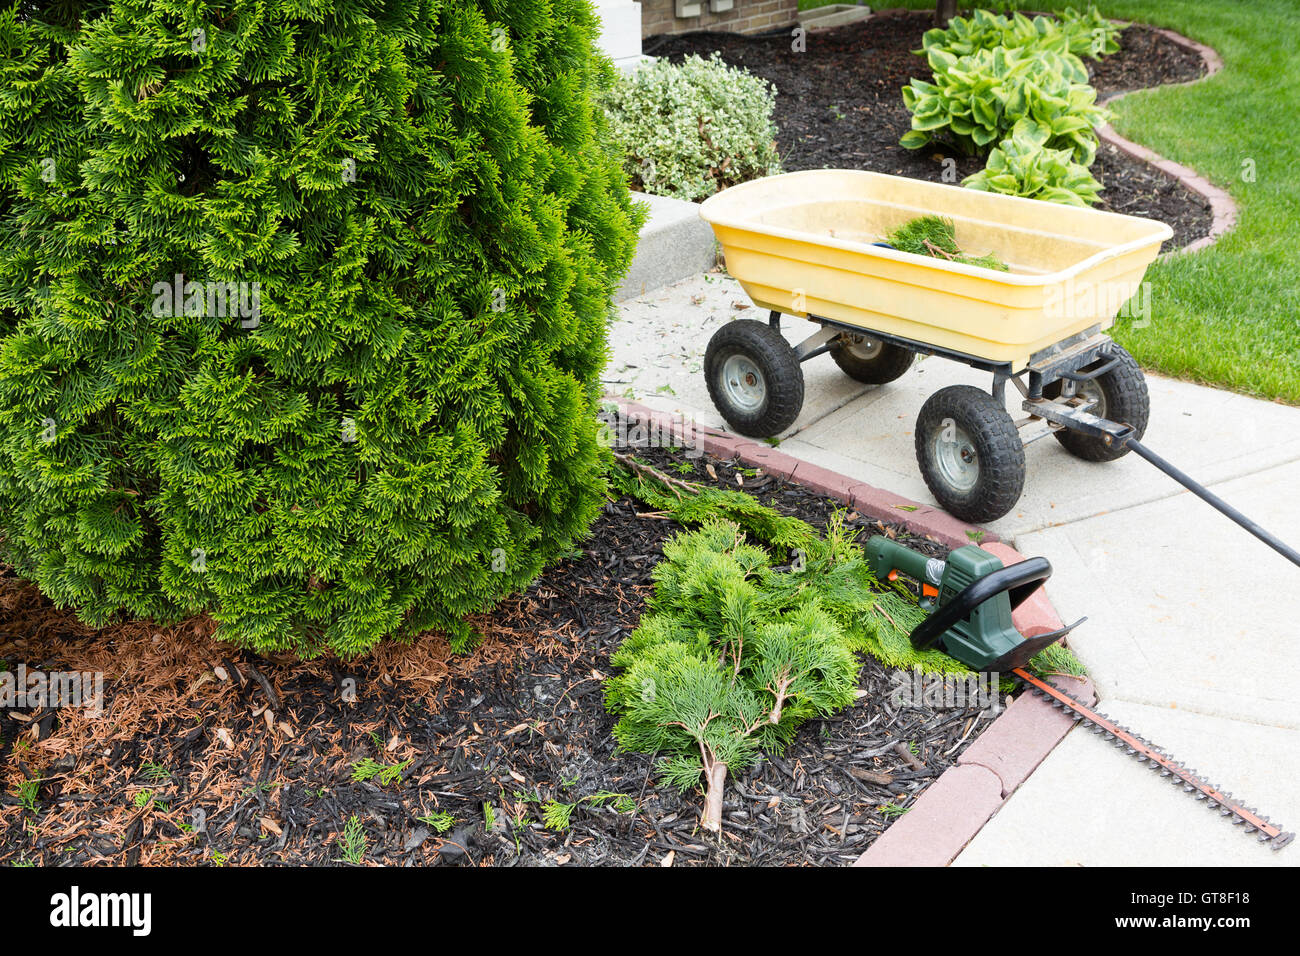 Garden tools used to trim arborvitaes in spring with a handheld hedge trimmer and small yellow metal cart standing alongside the Stock Photo